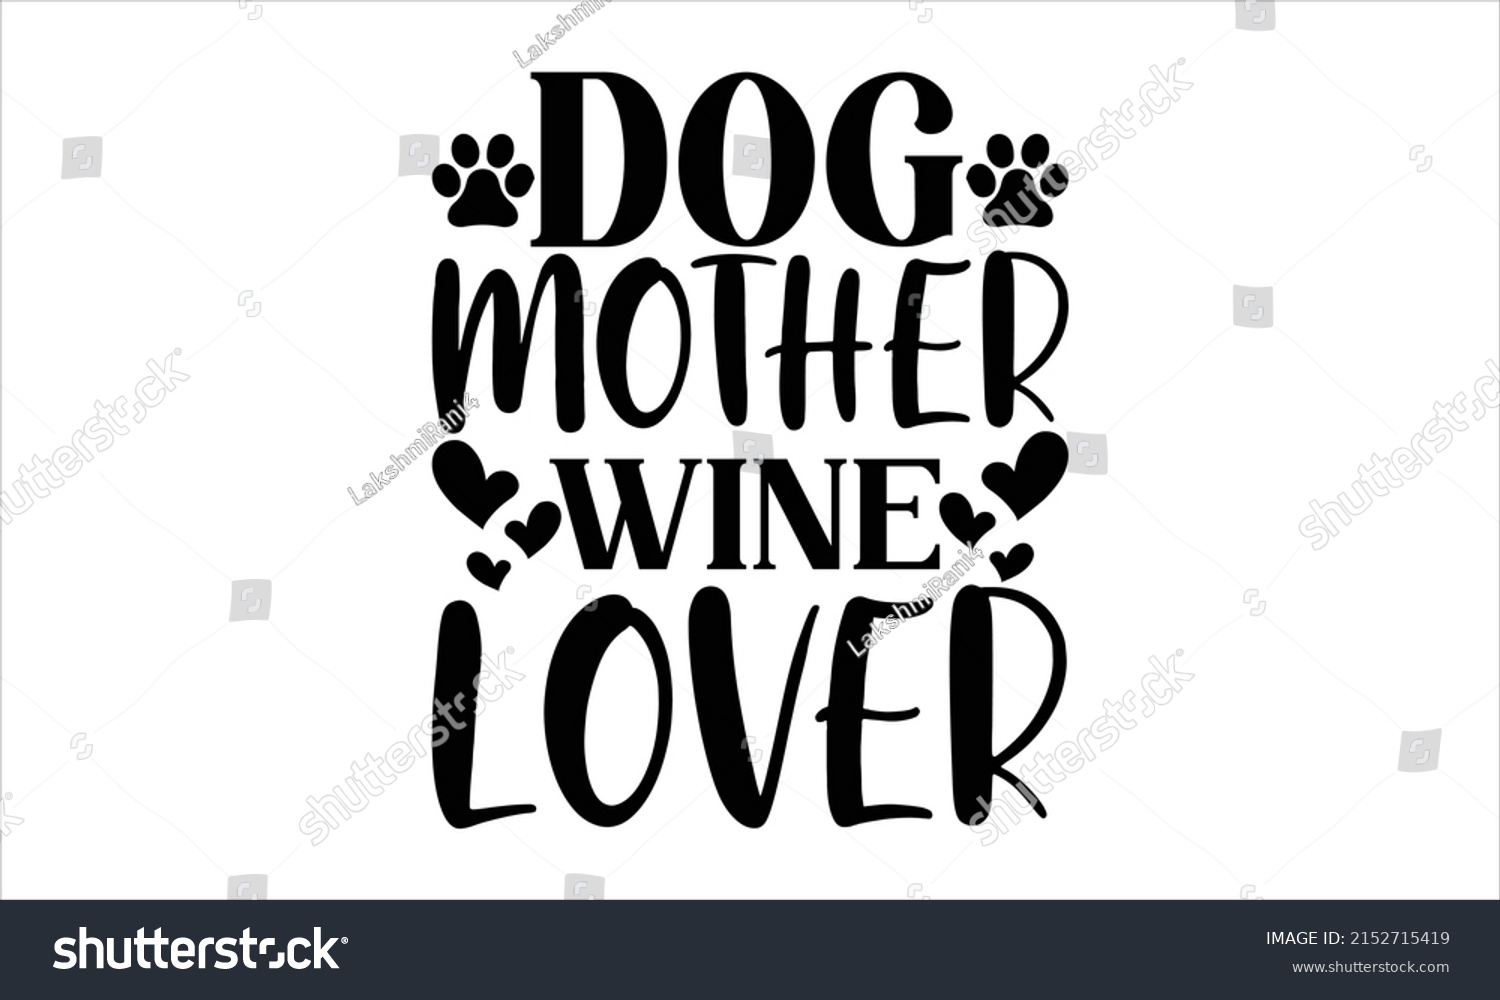 SVG of  Dog mother wine lover  -   Lettering design for greeting banners, Mouse Pads, Prints, Cards and Posters, Mugs, Notebooks, Floor Pillows and T-shirt prints design.
 svg